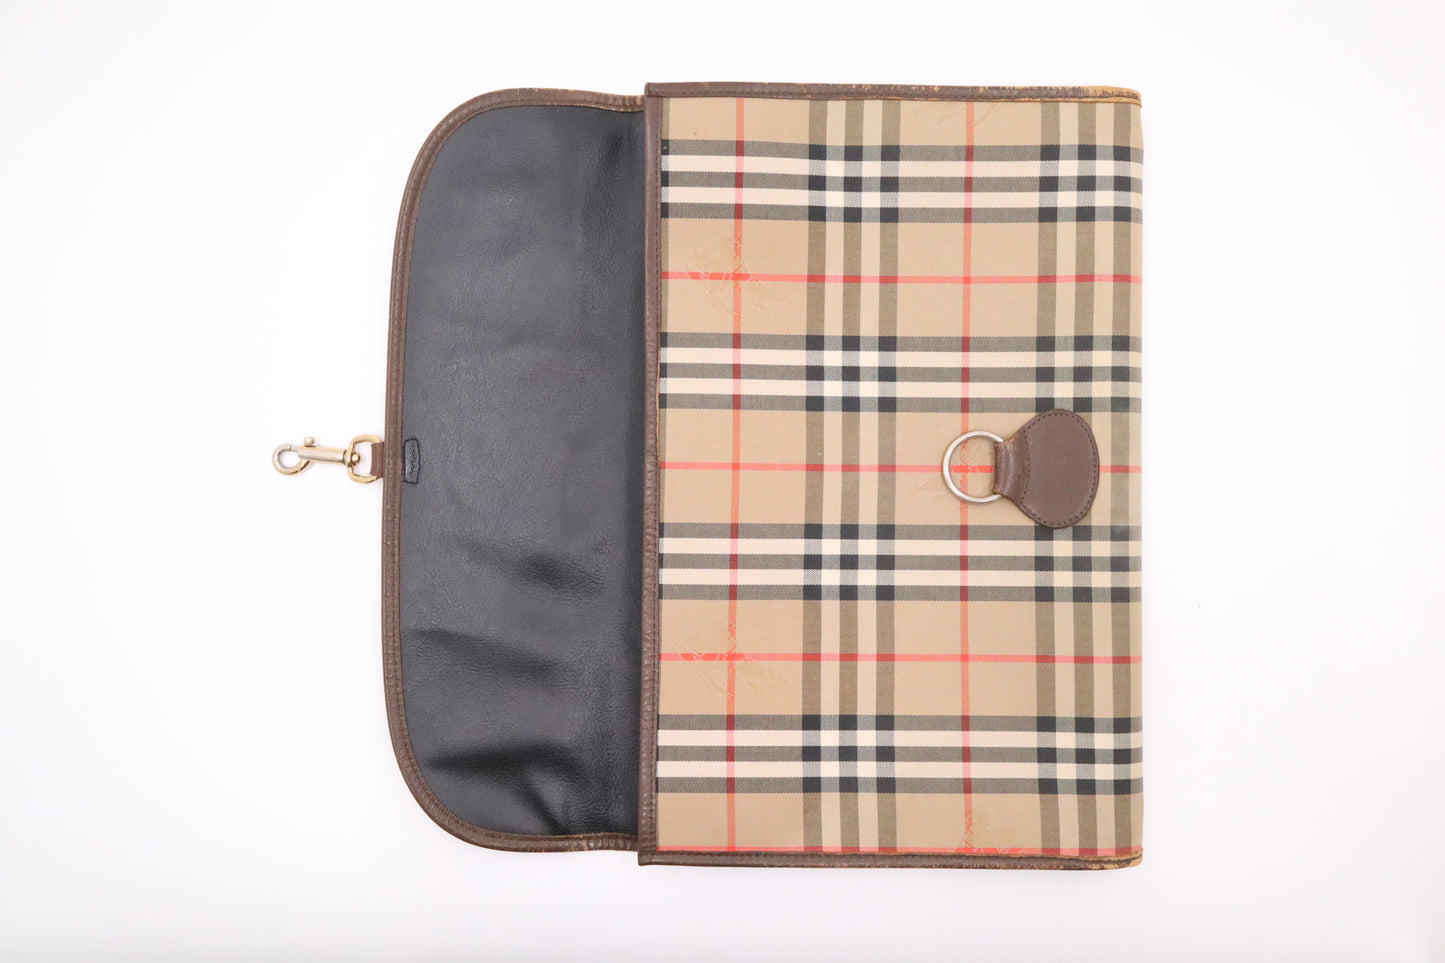 Burberry Clutch in House Check Canvas